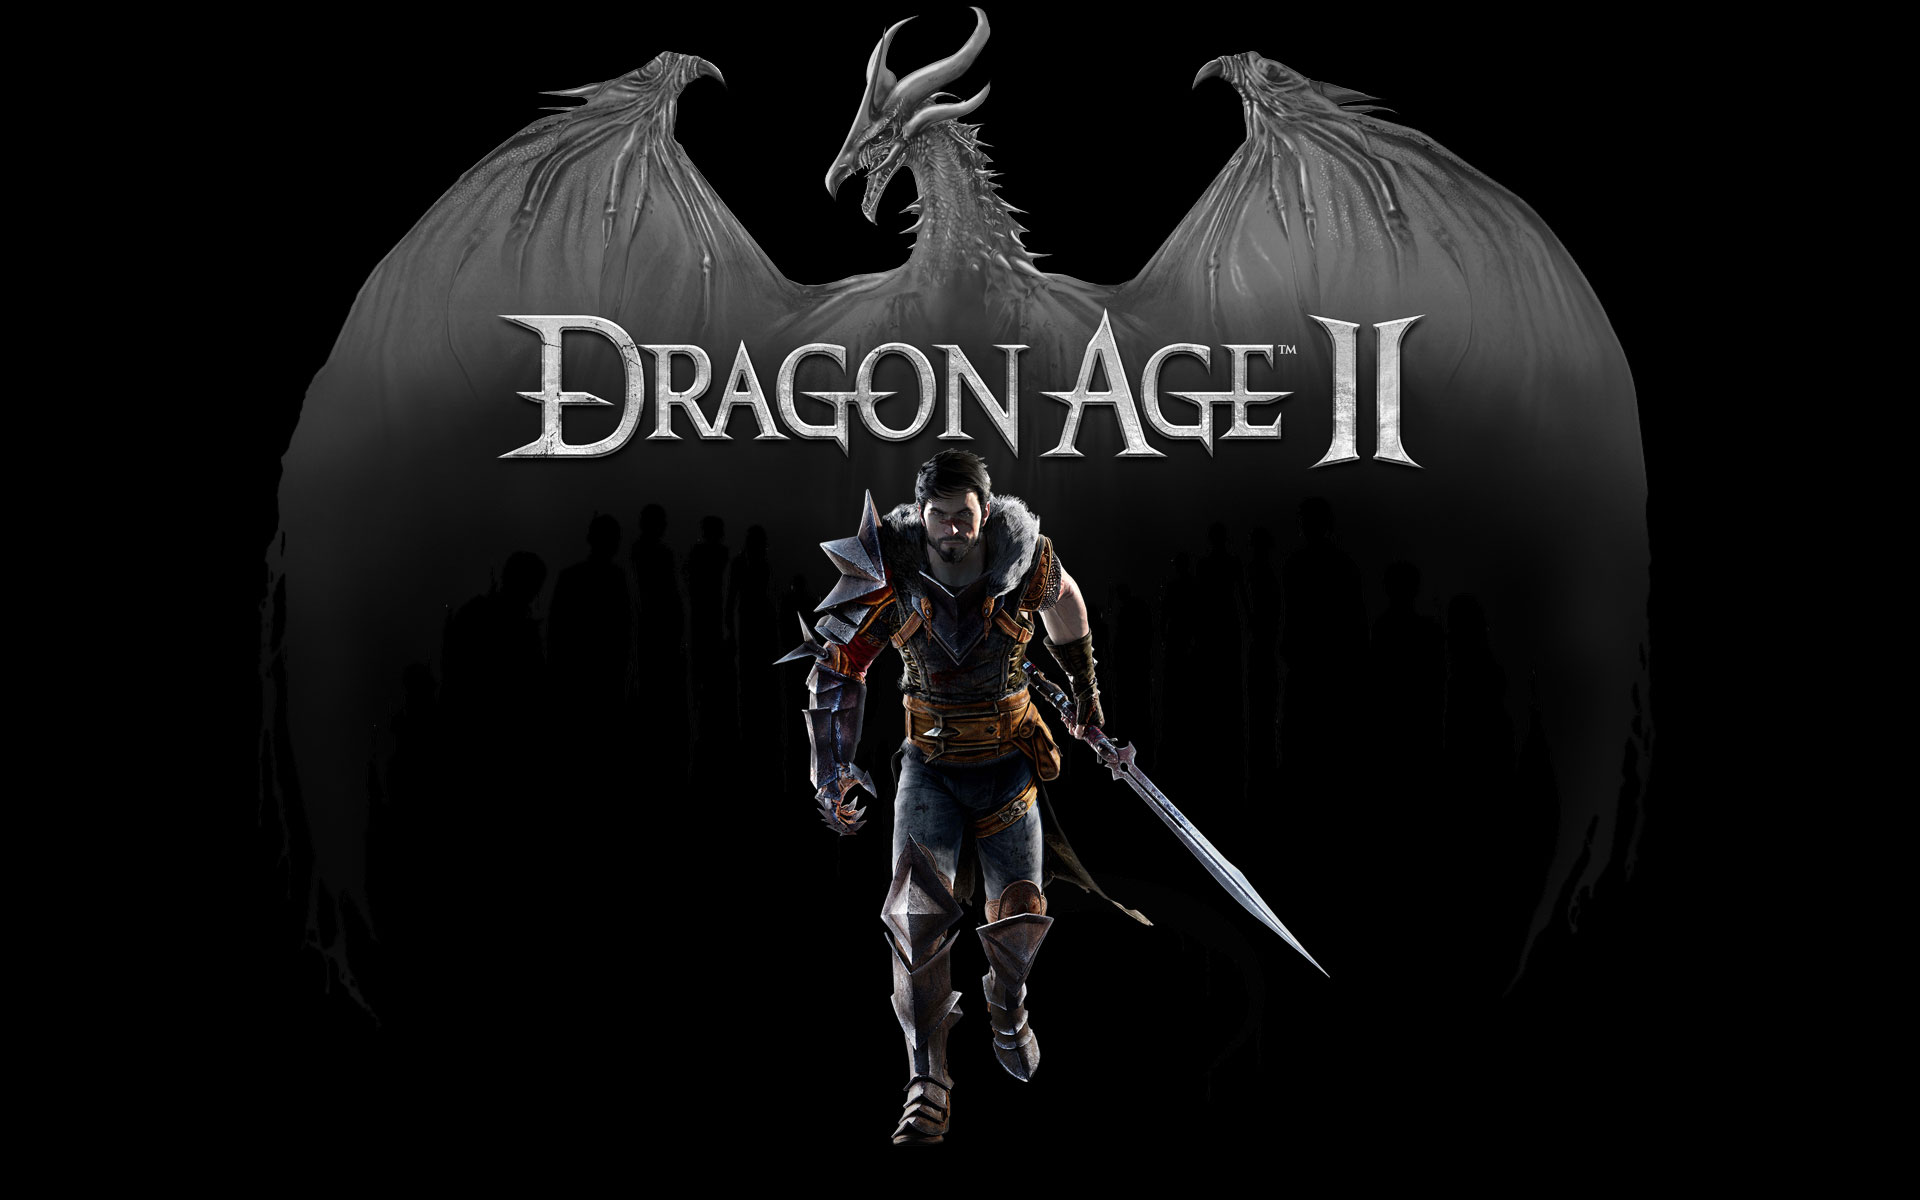 Dragon Age Logo 5234 Hd Wallpapers in Logos   Imagescicom 1920x1200